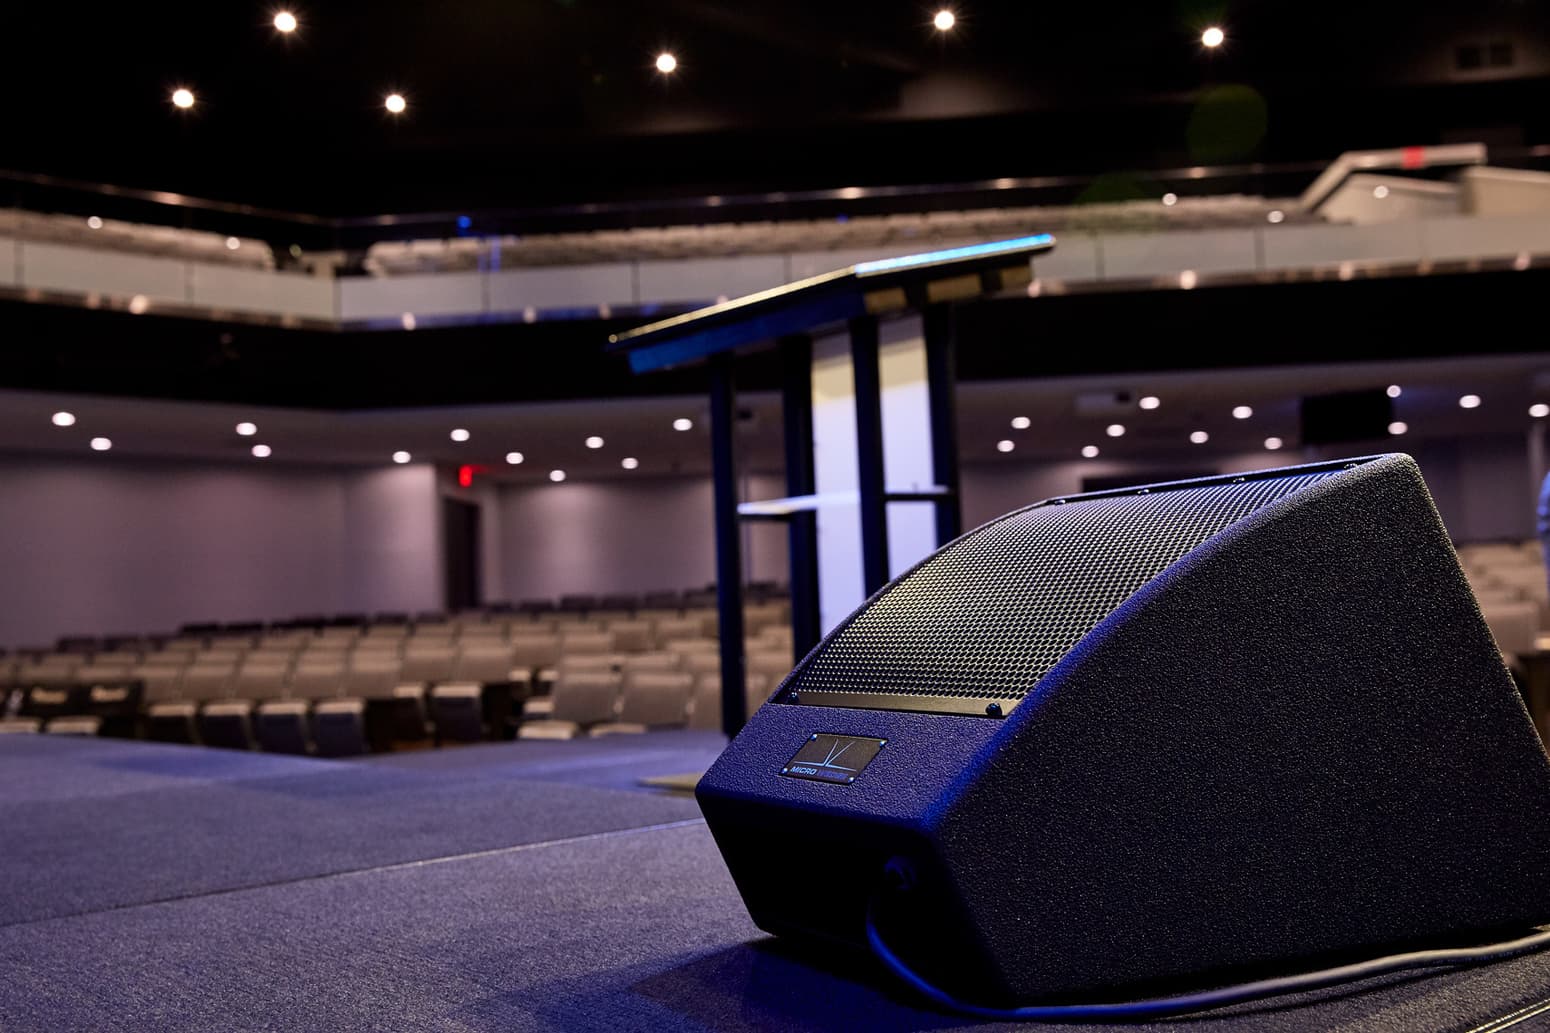 For AVL sound in their audio designs, Paragon 360 uses the latest in speakers, like this.